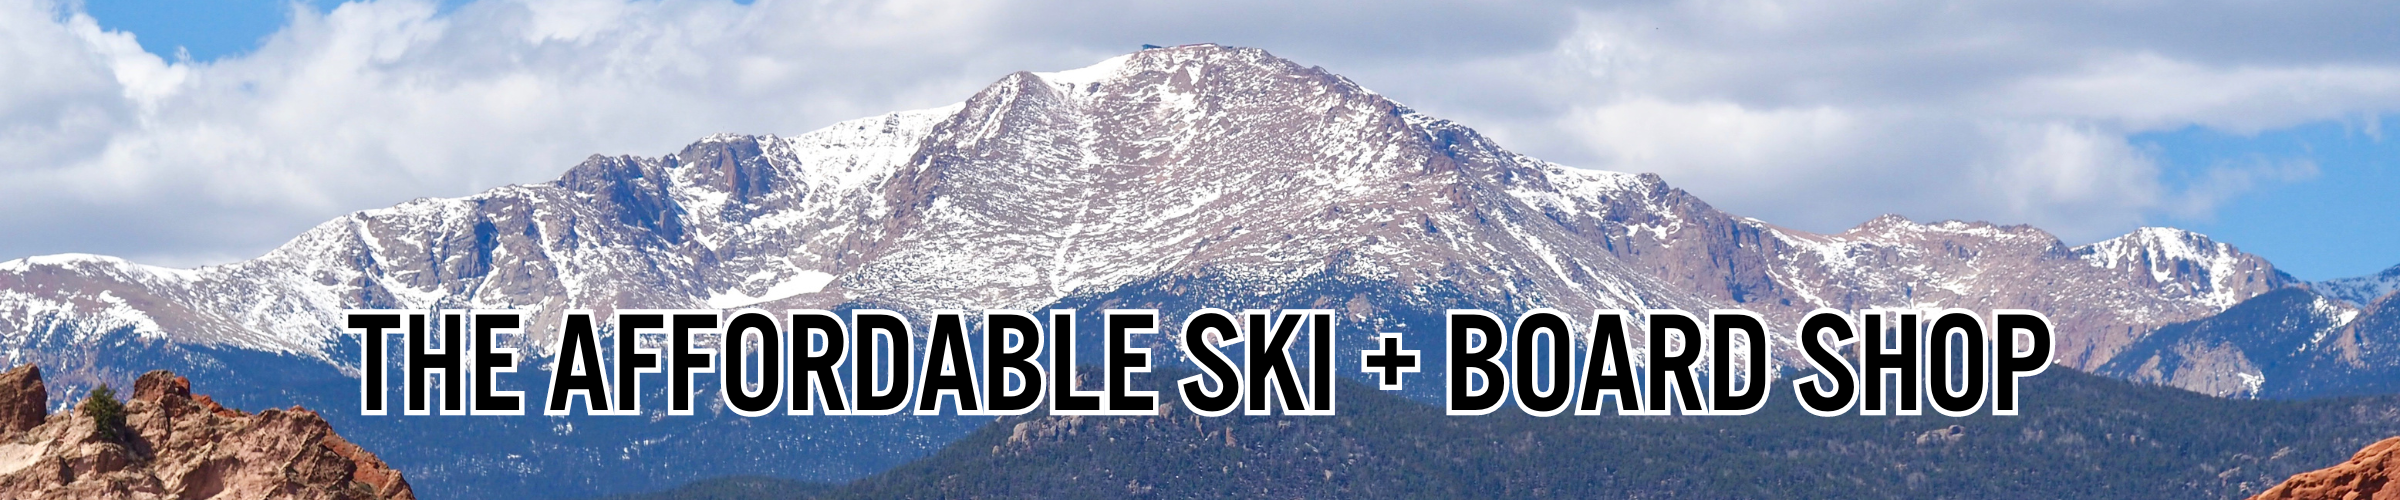 Affordable skis and snowboards in colorado springs